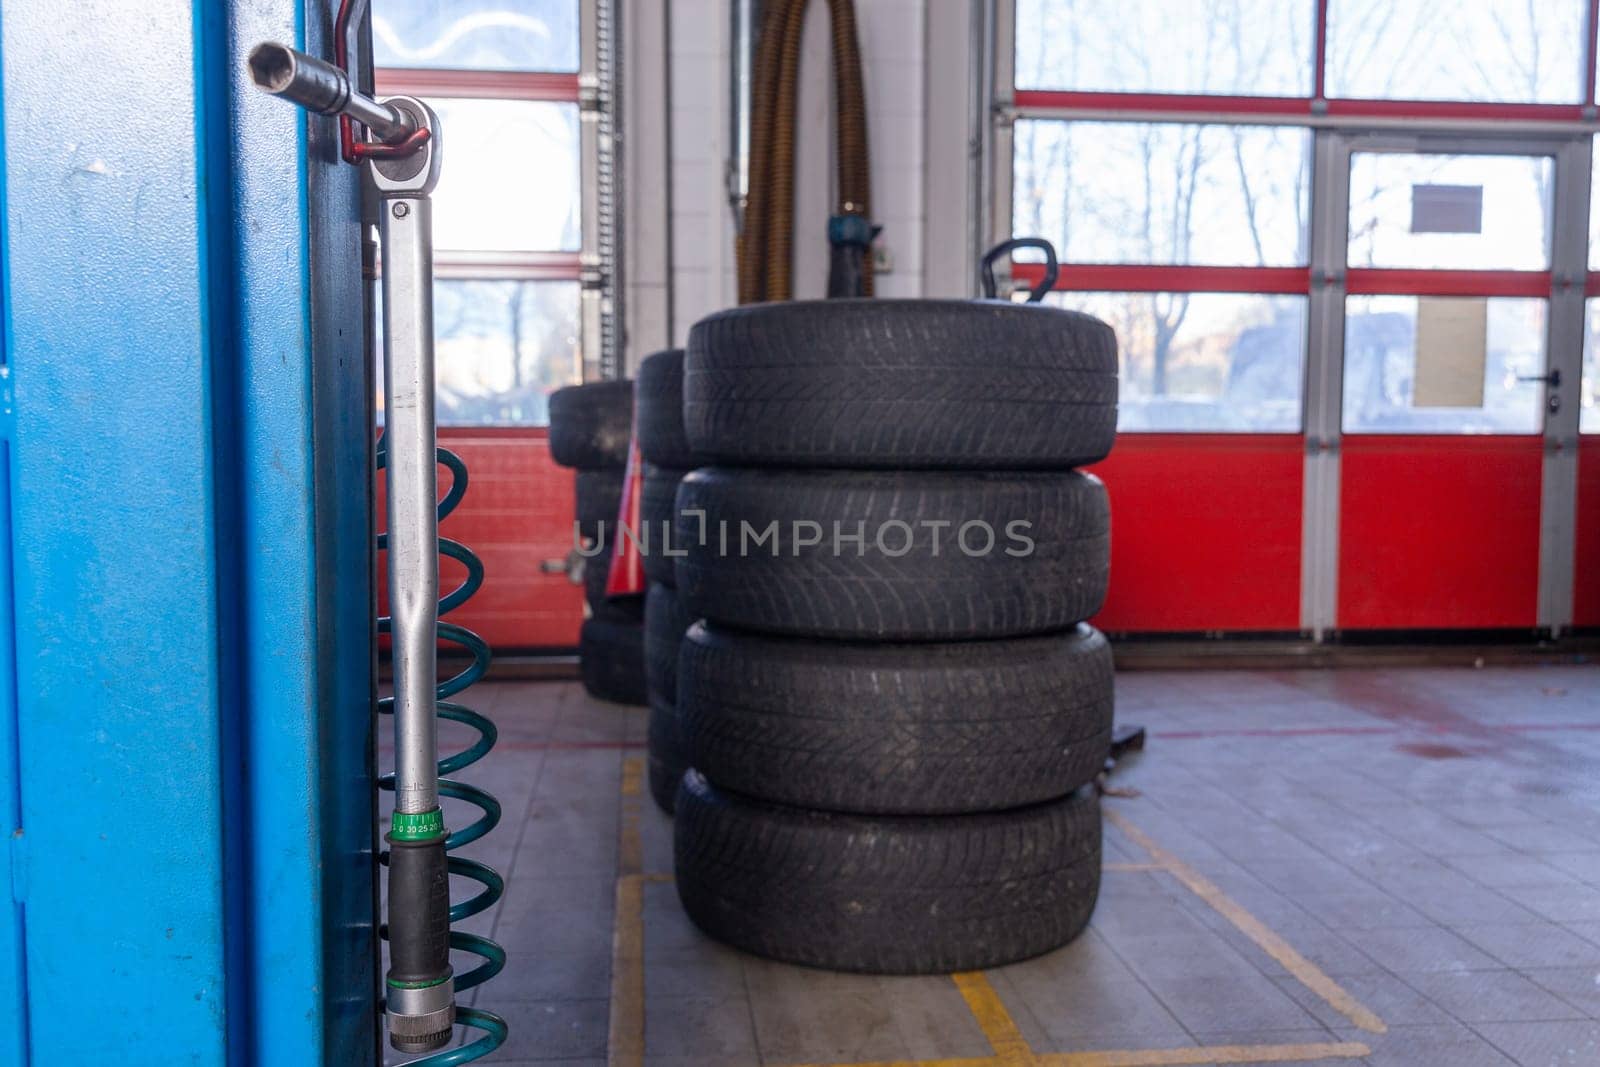 A set of tires for seasonal replacement near the lift in the tire workshop. by BY-_-BY